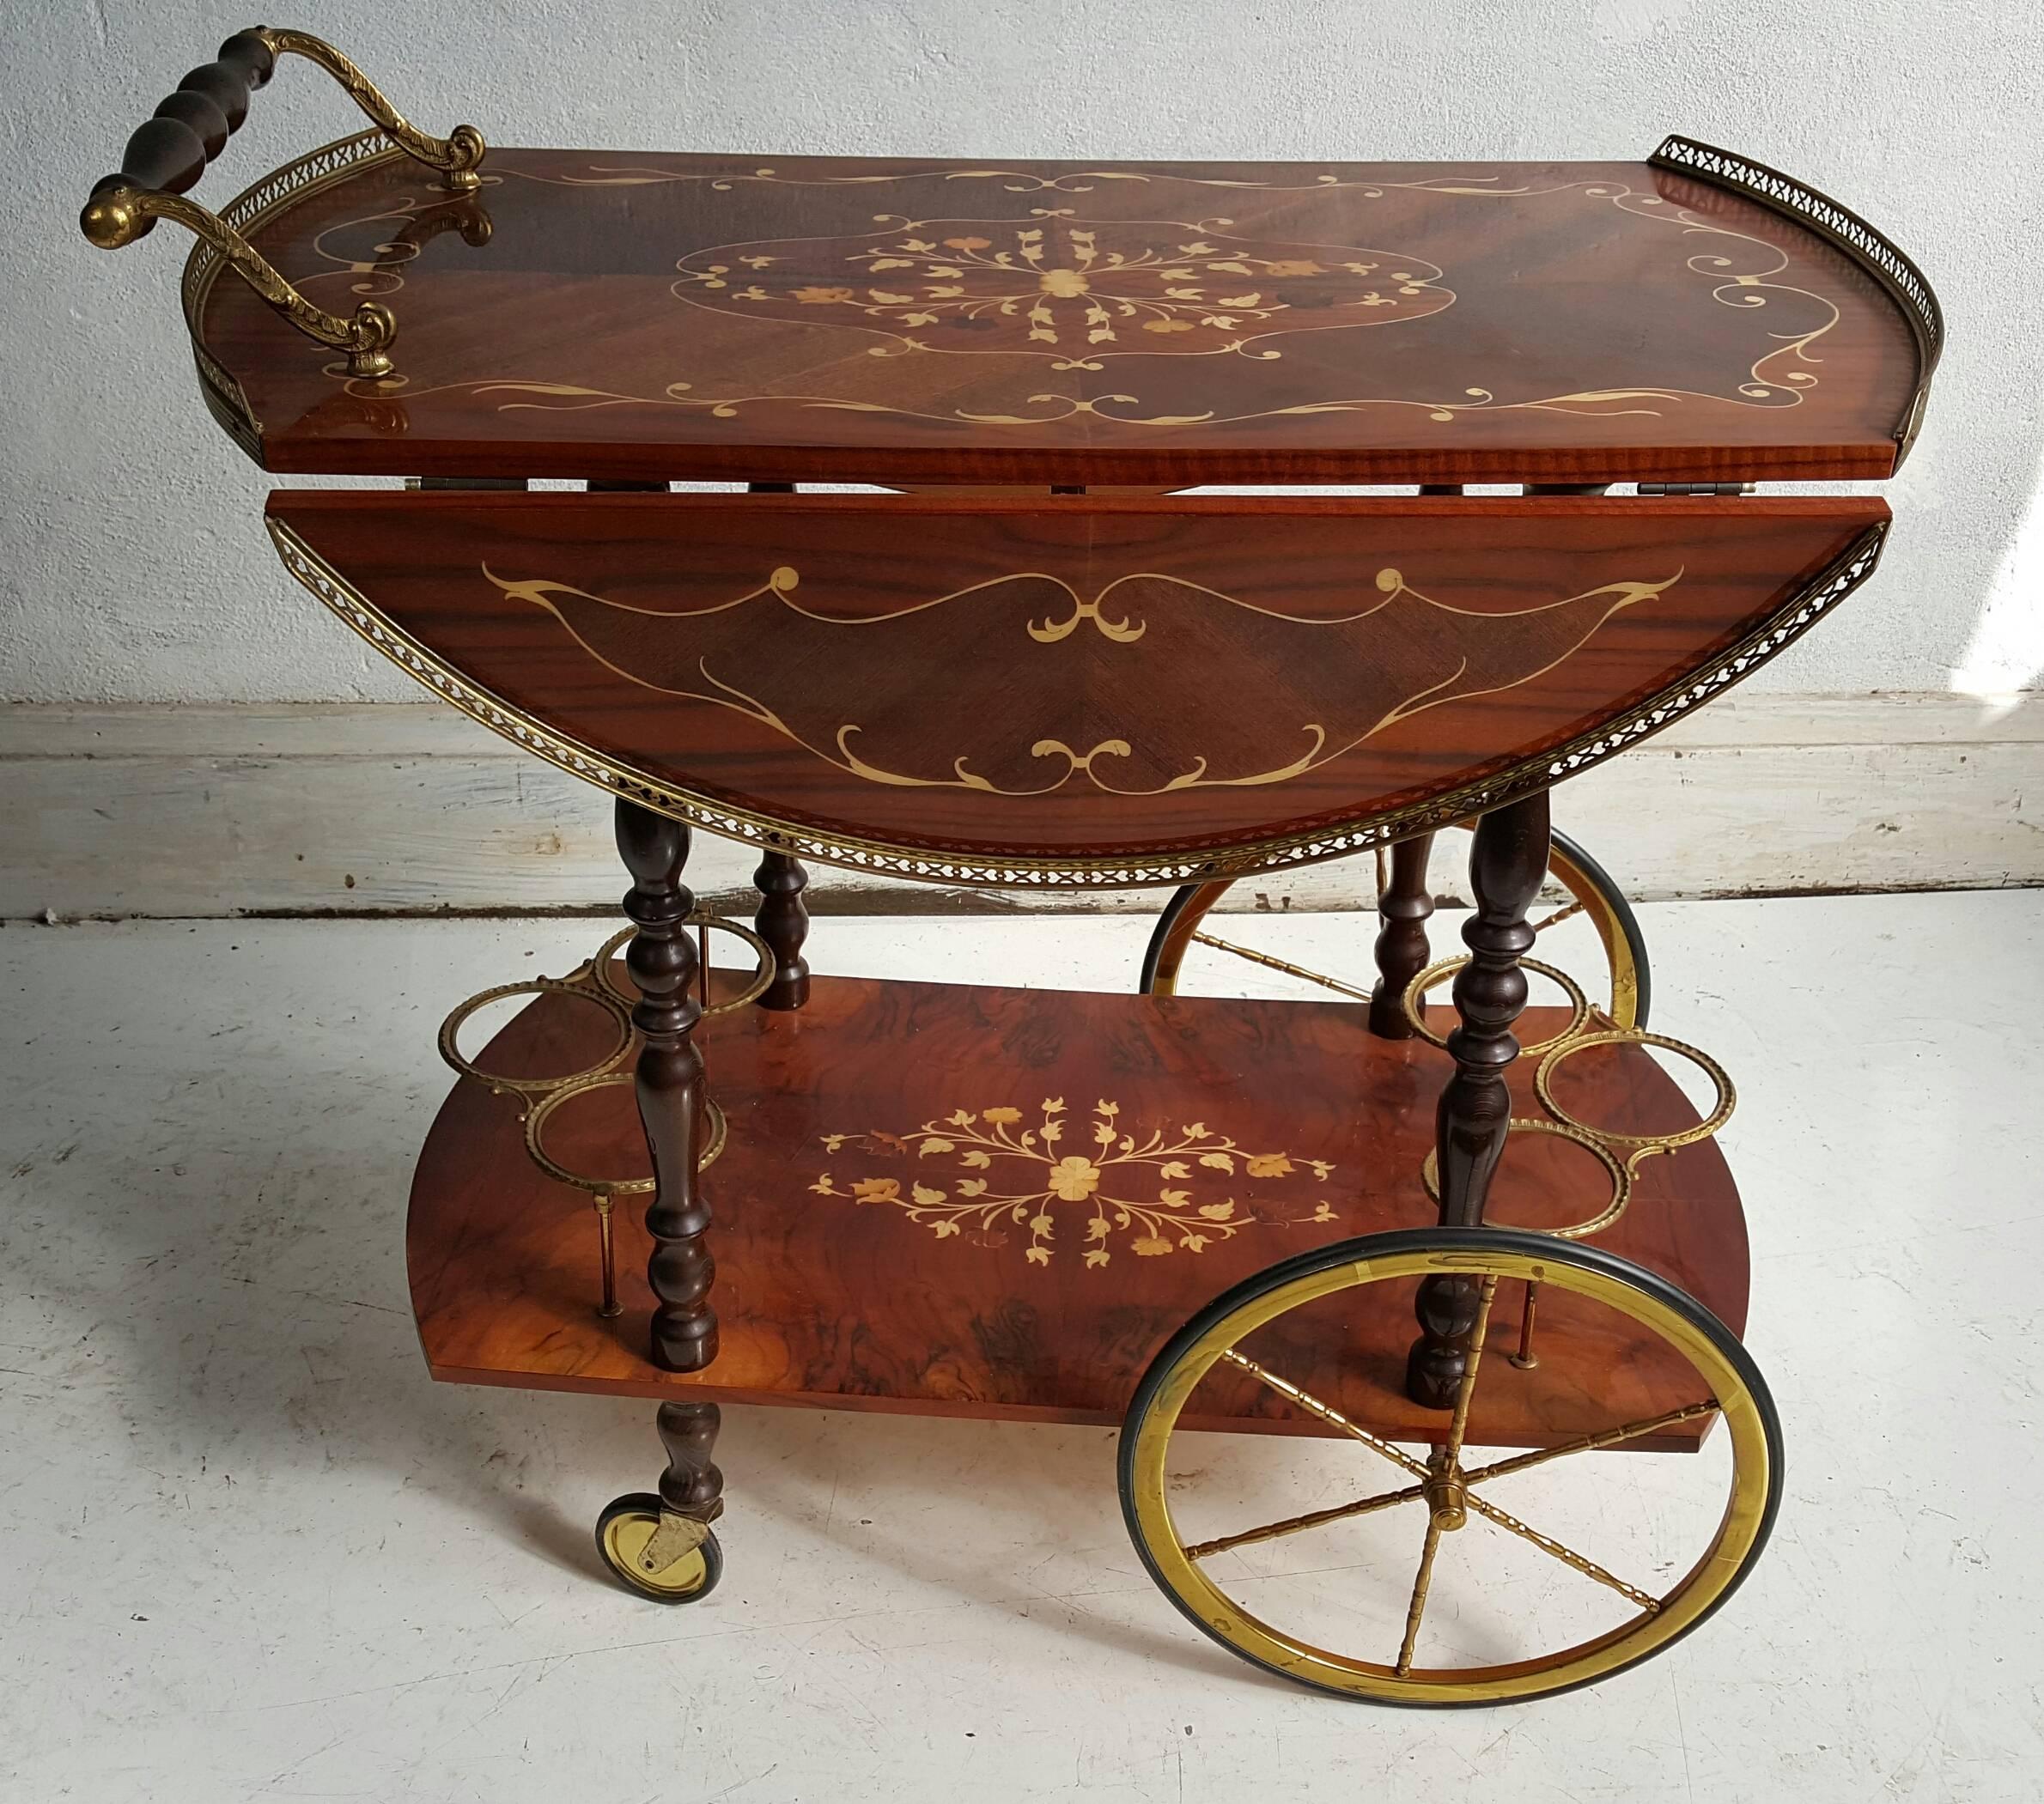 This beautiful vintage Italian drop-leaf bar cart, produced, circa 1950s, includes two tiers of lacquered burl, each inlaid with central floral marquetry, with brass trim to the top gallery and wood handle, the six bottle holders below, as well as